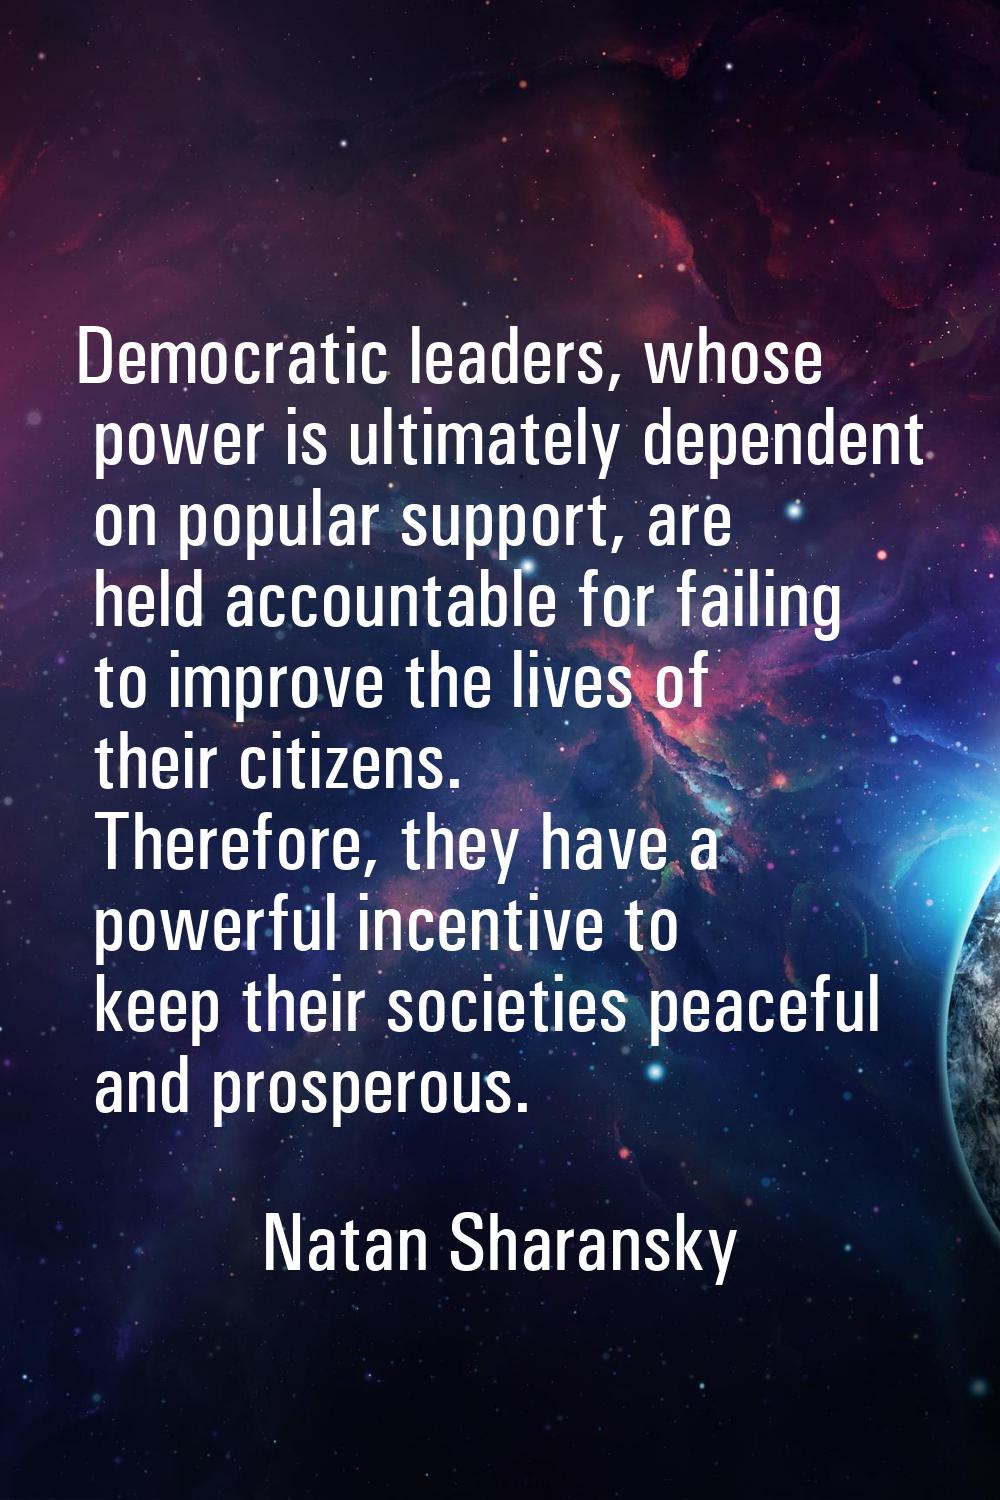 Democratic leaders, whose power is ultimately dependent on popular support, are held accountable fo